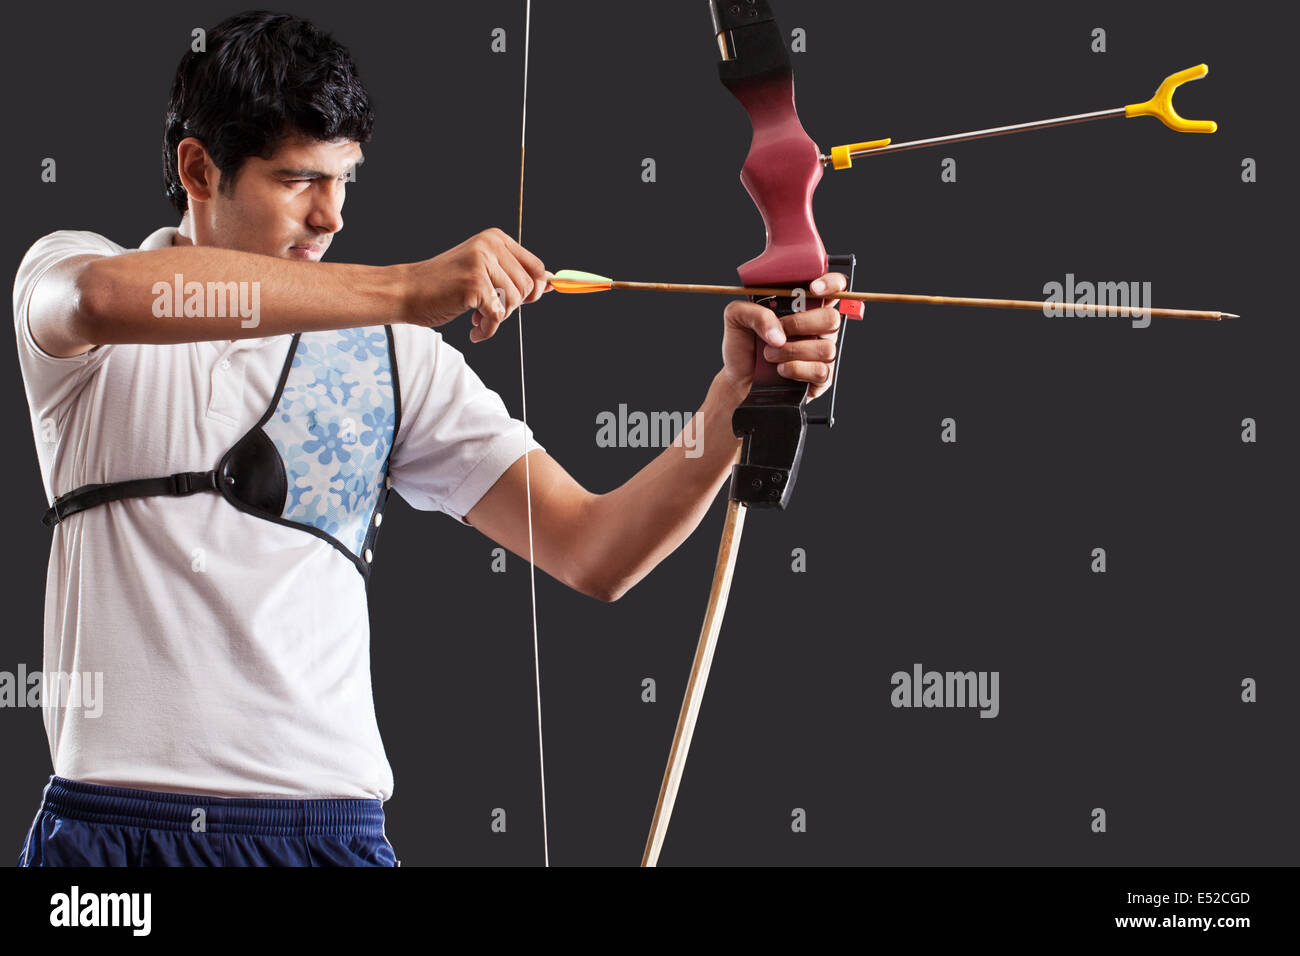 Man aiming bow and arrow isolated over black background Stock Photo